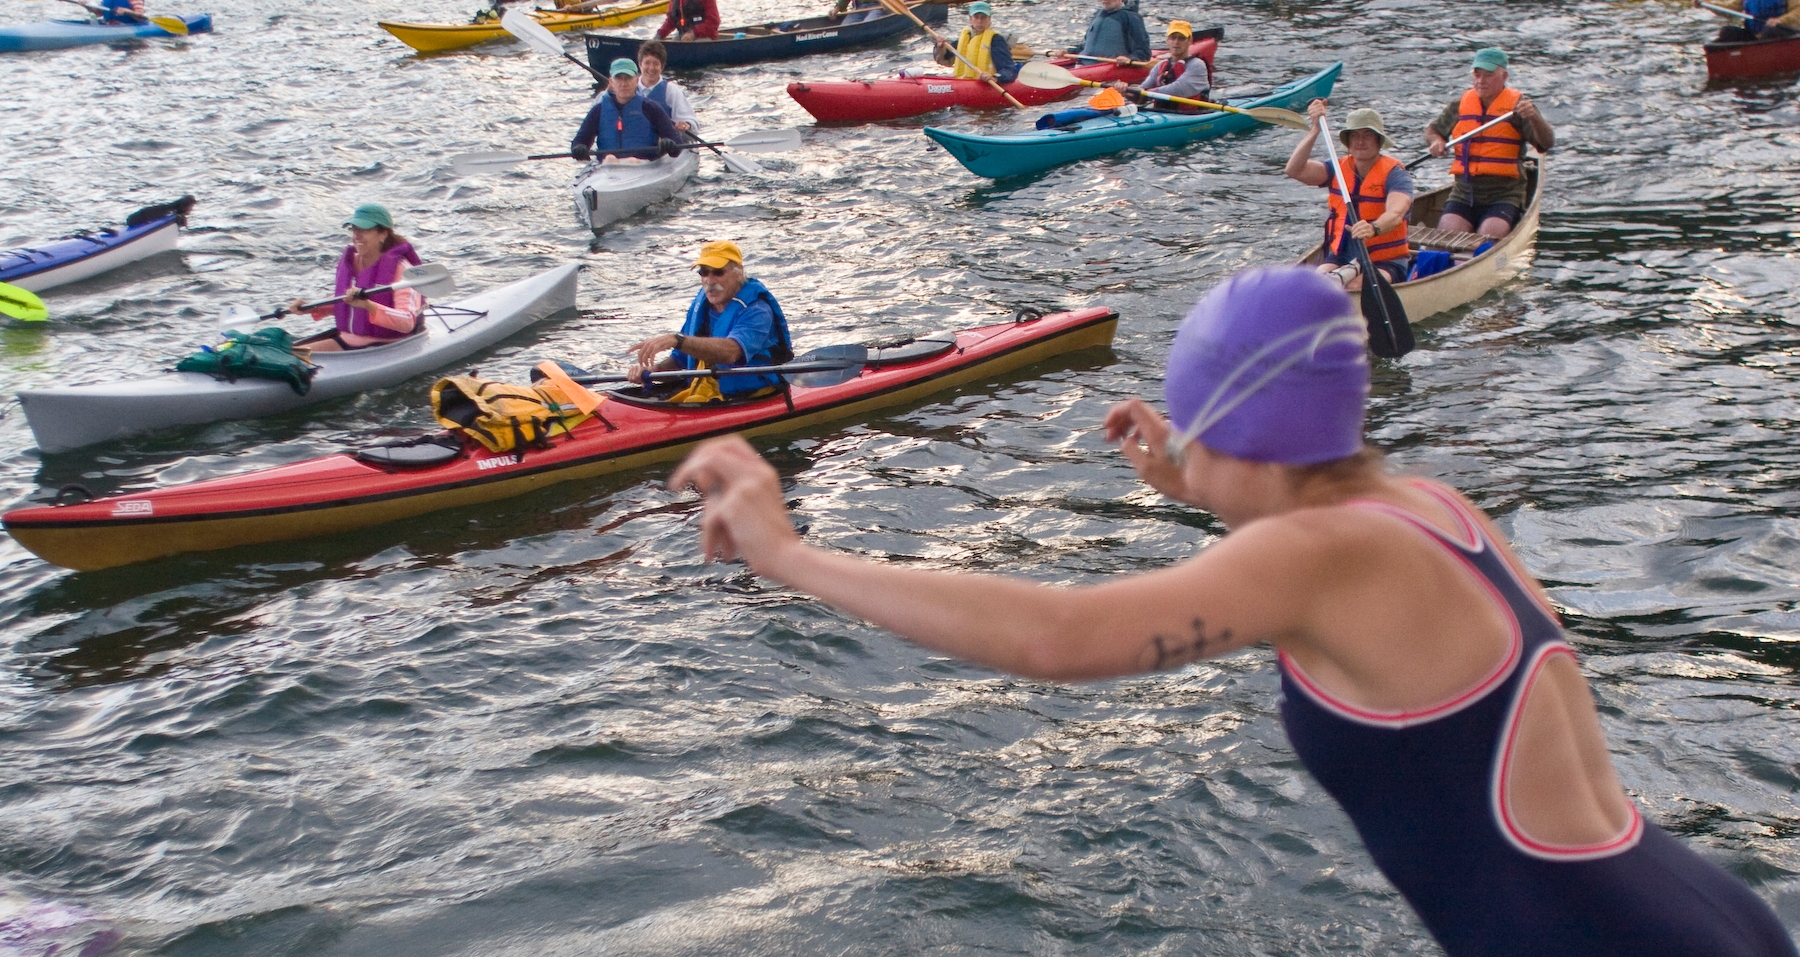 A person on the right hand side of the frame is mid-jumping into the water. They are wearing a purple swim cap, goggles, and a one-piece swimsuit. Many kayakers are onlooking.